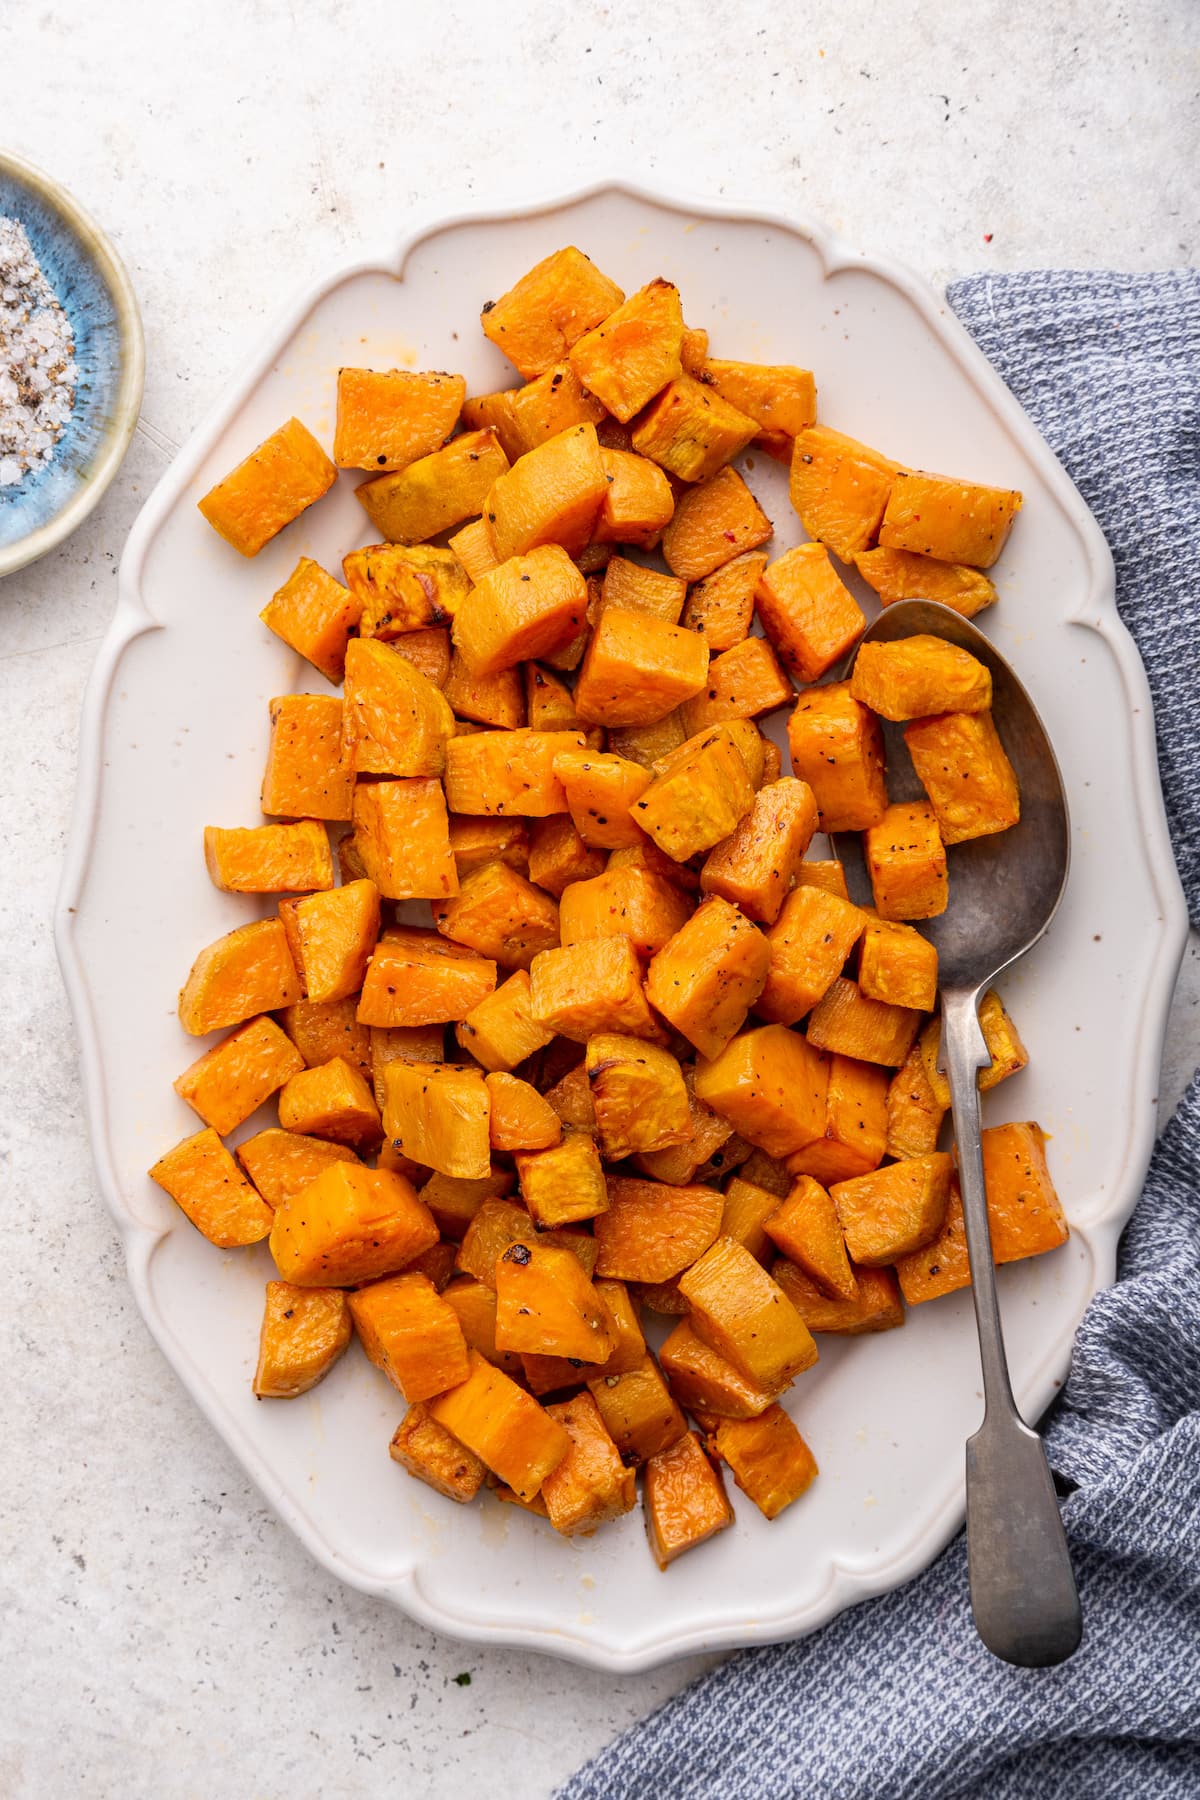 Cubed roasted sweet potatoes on a plate with a metal spoon.